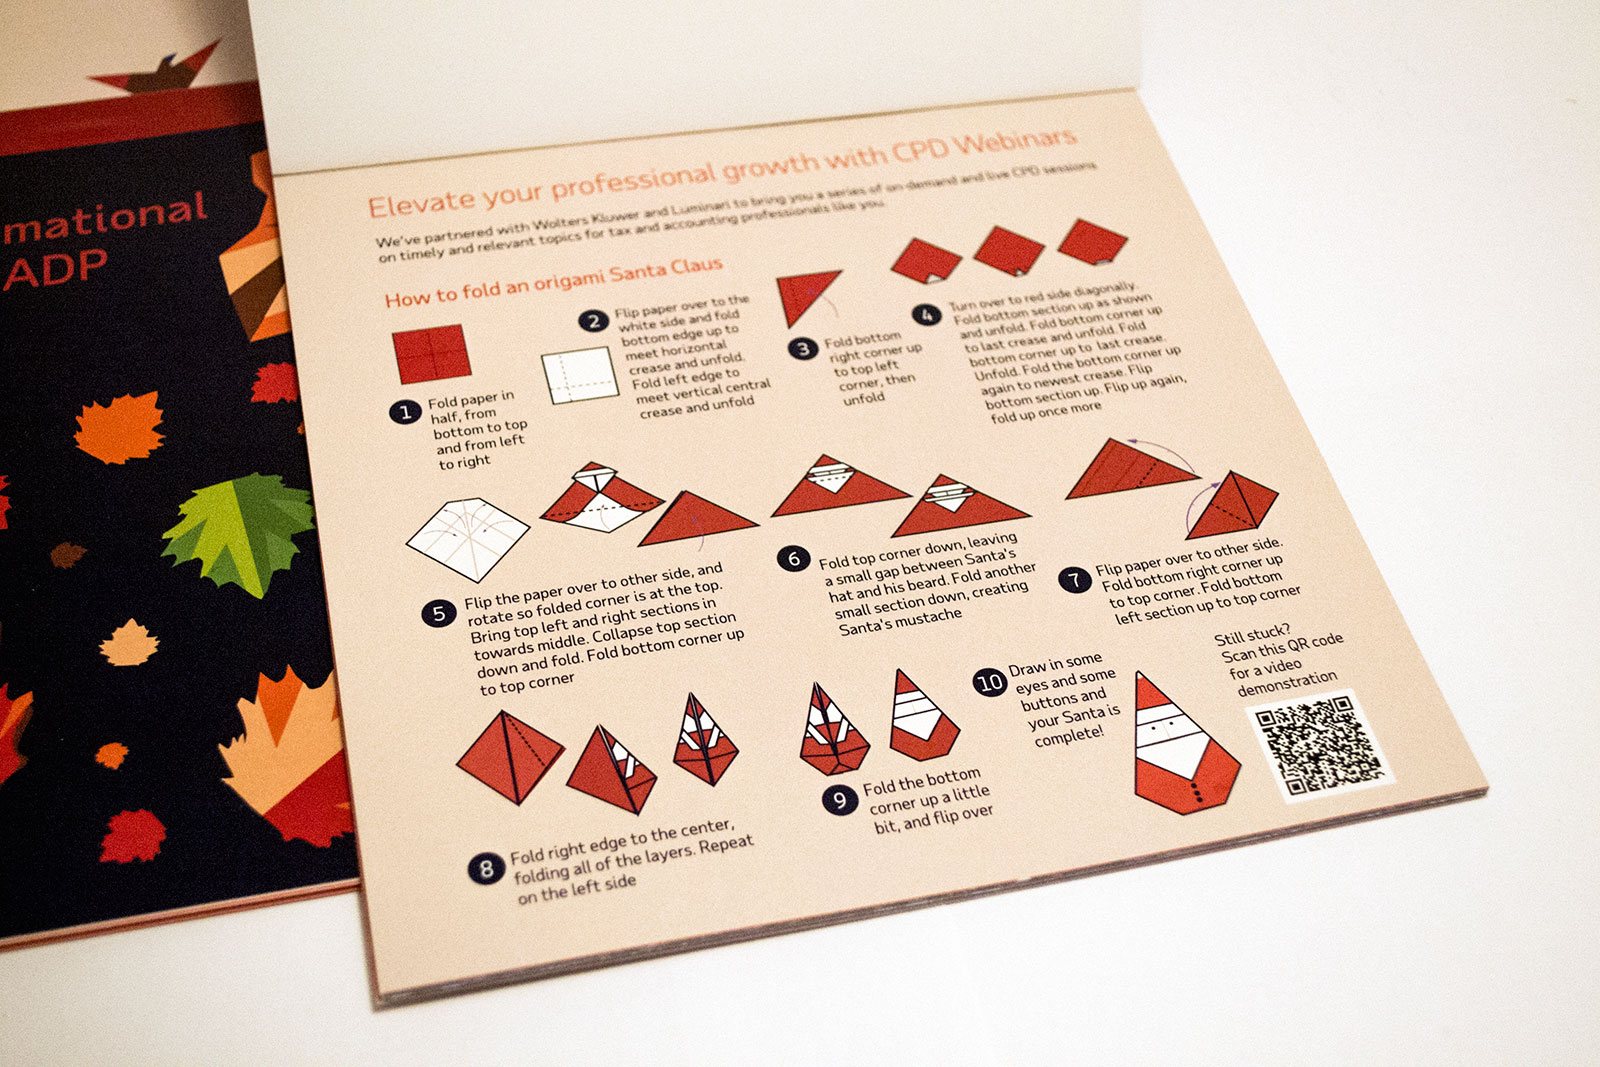 inside page of instructions for folding an origami santa with a QR code at the bottom to scan for a video demonstration